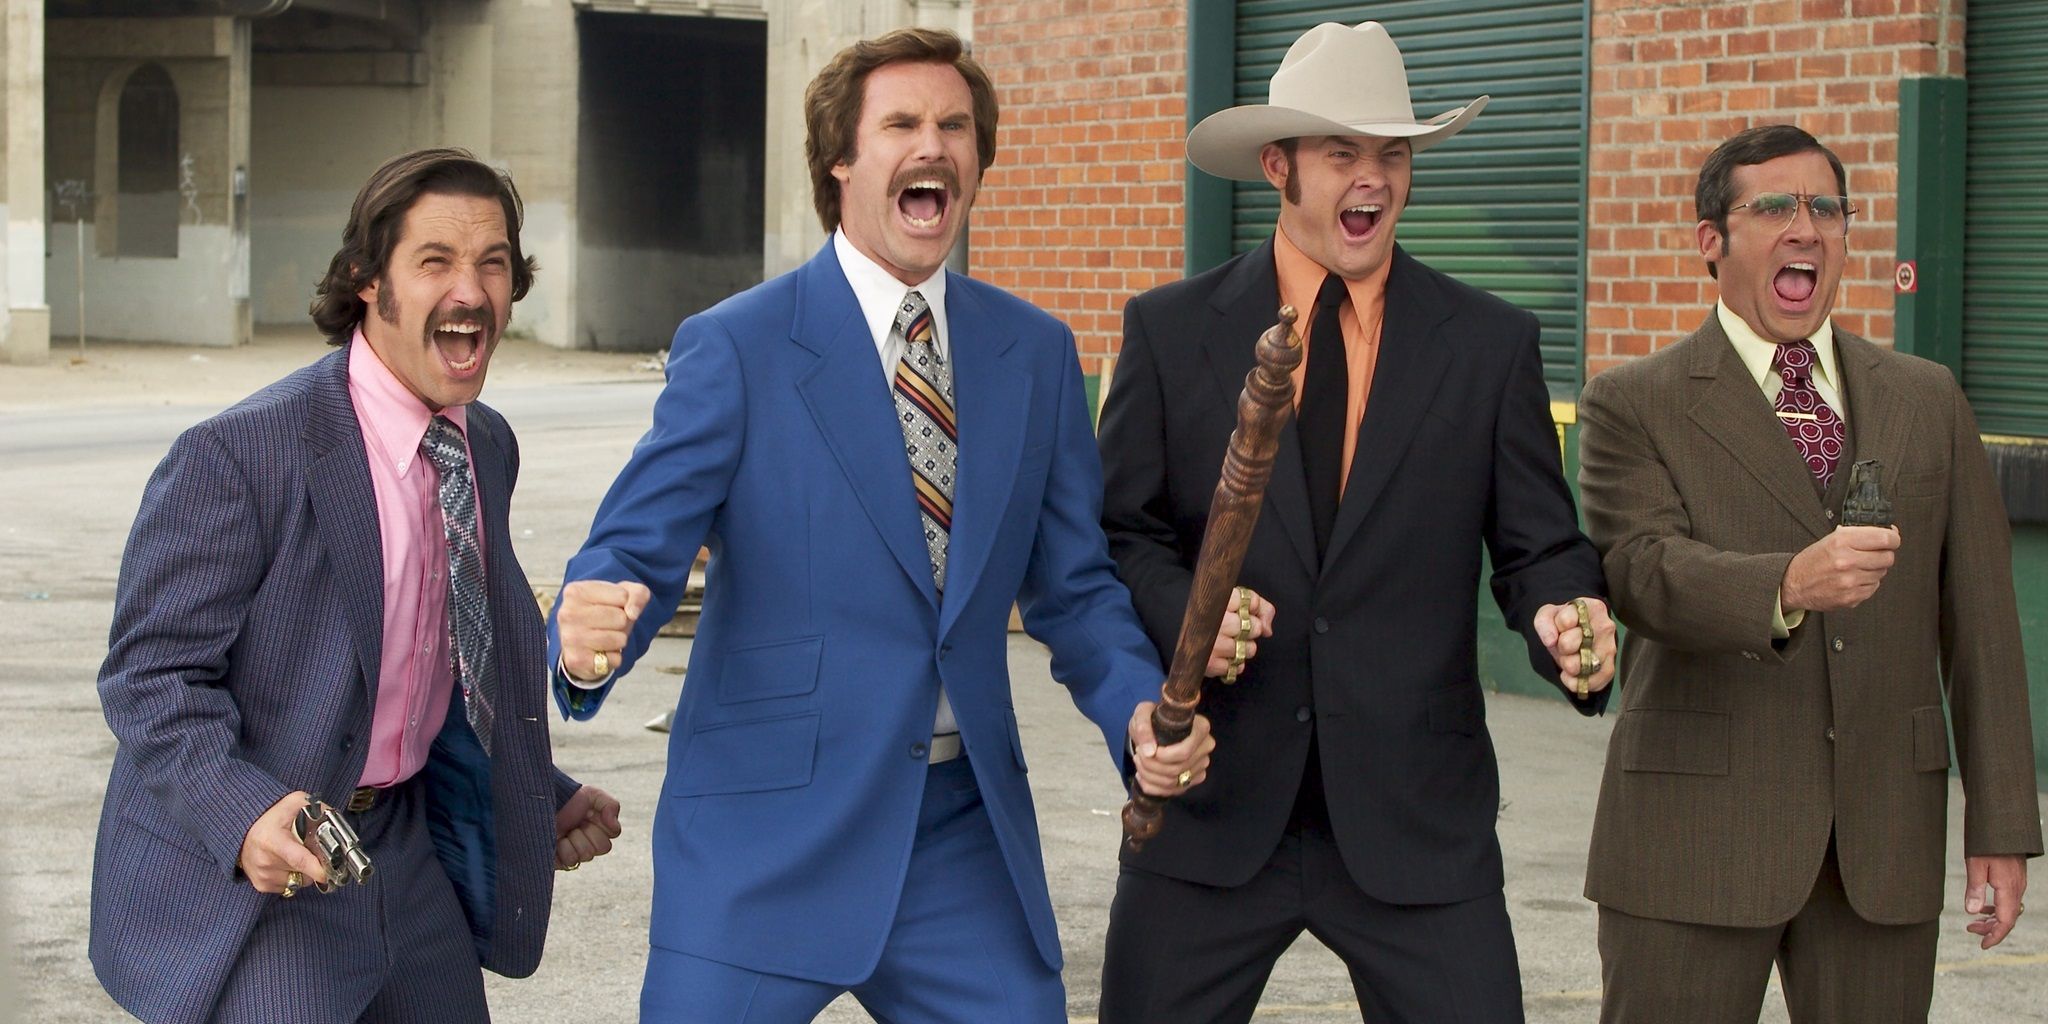 The news team prepares for battle in Anchorman